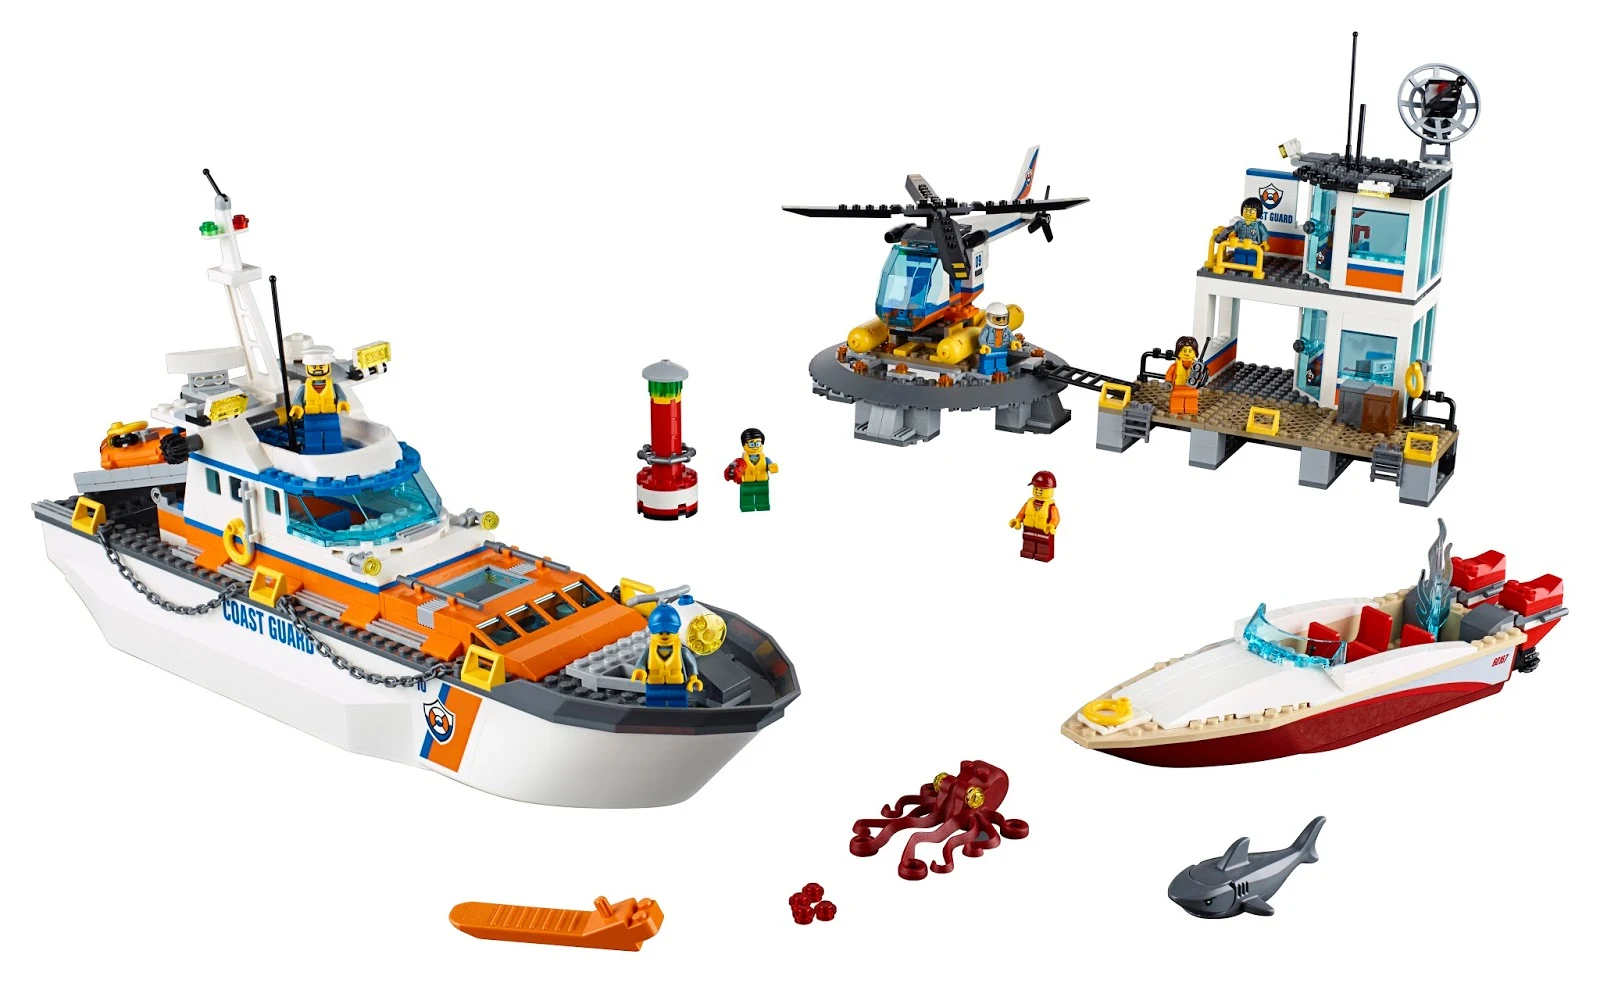 The Lego Coast Guard Headquarters set assembles including 2 boats, headquarters, helicopter , people and animals